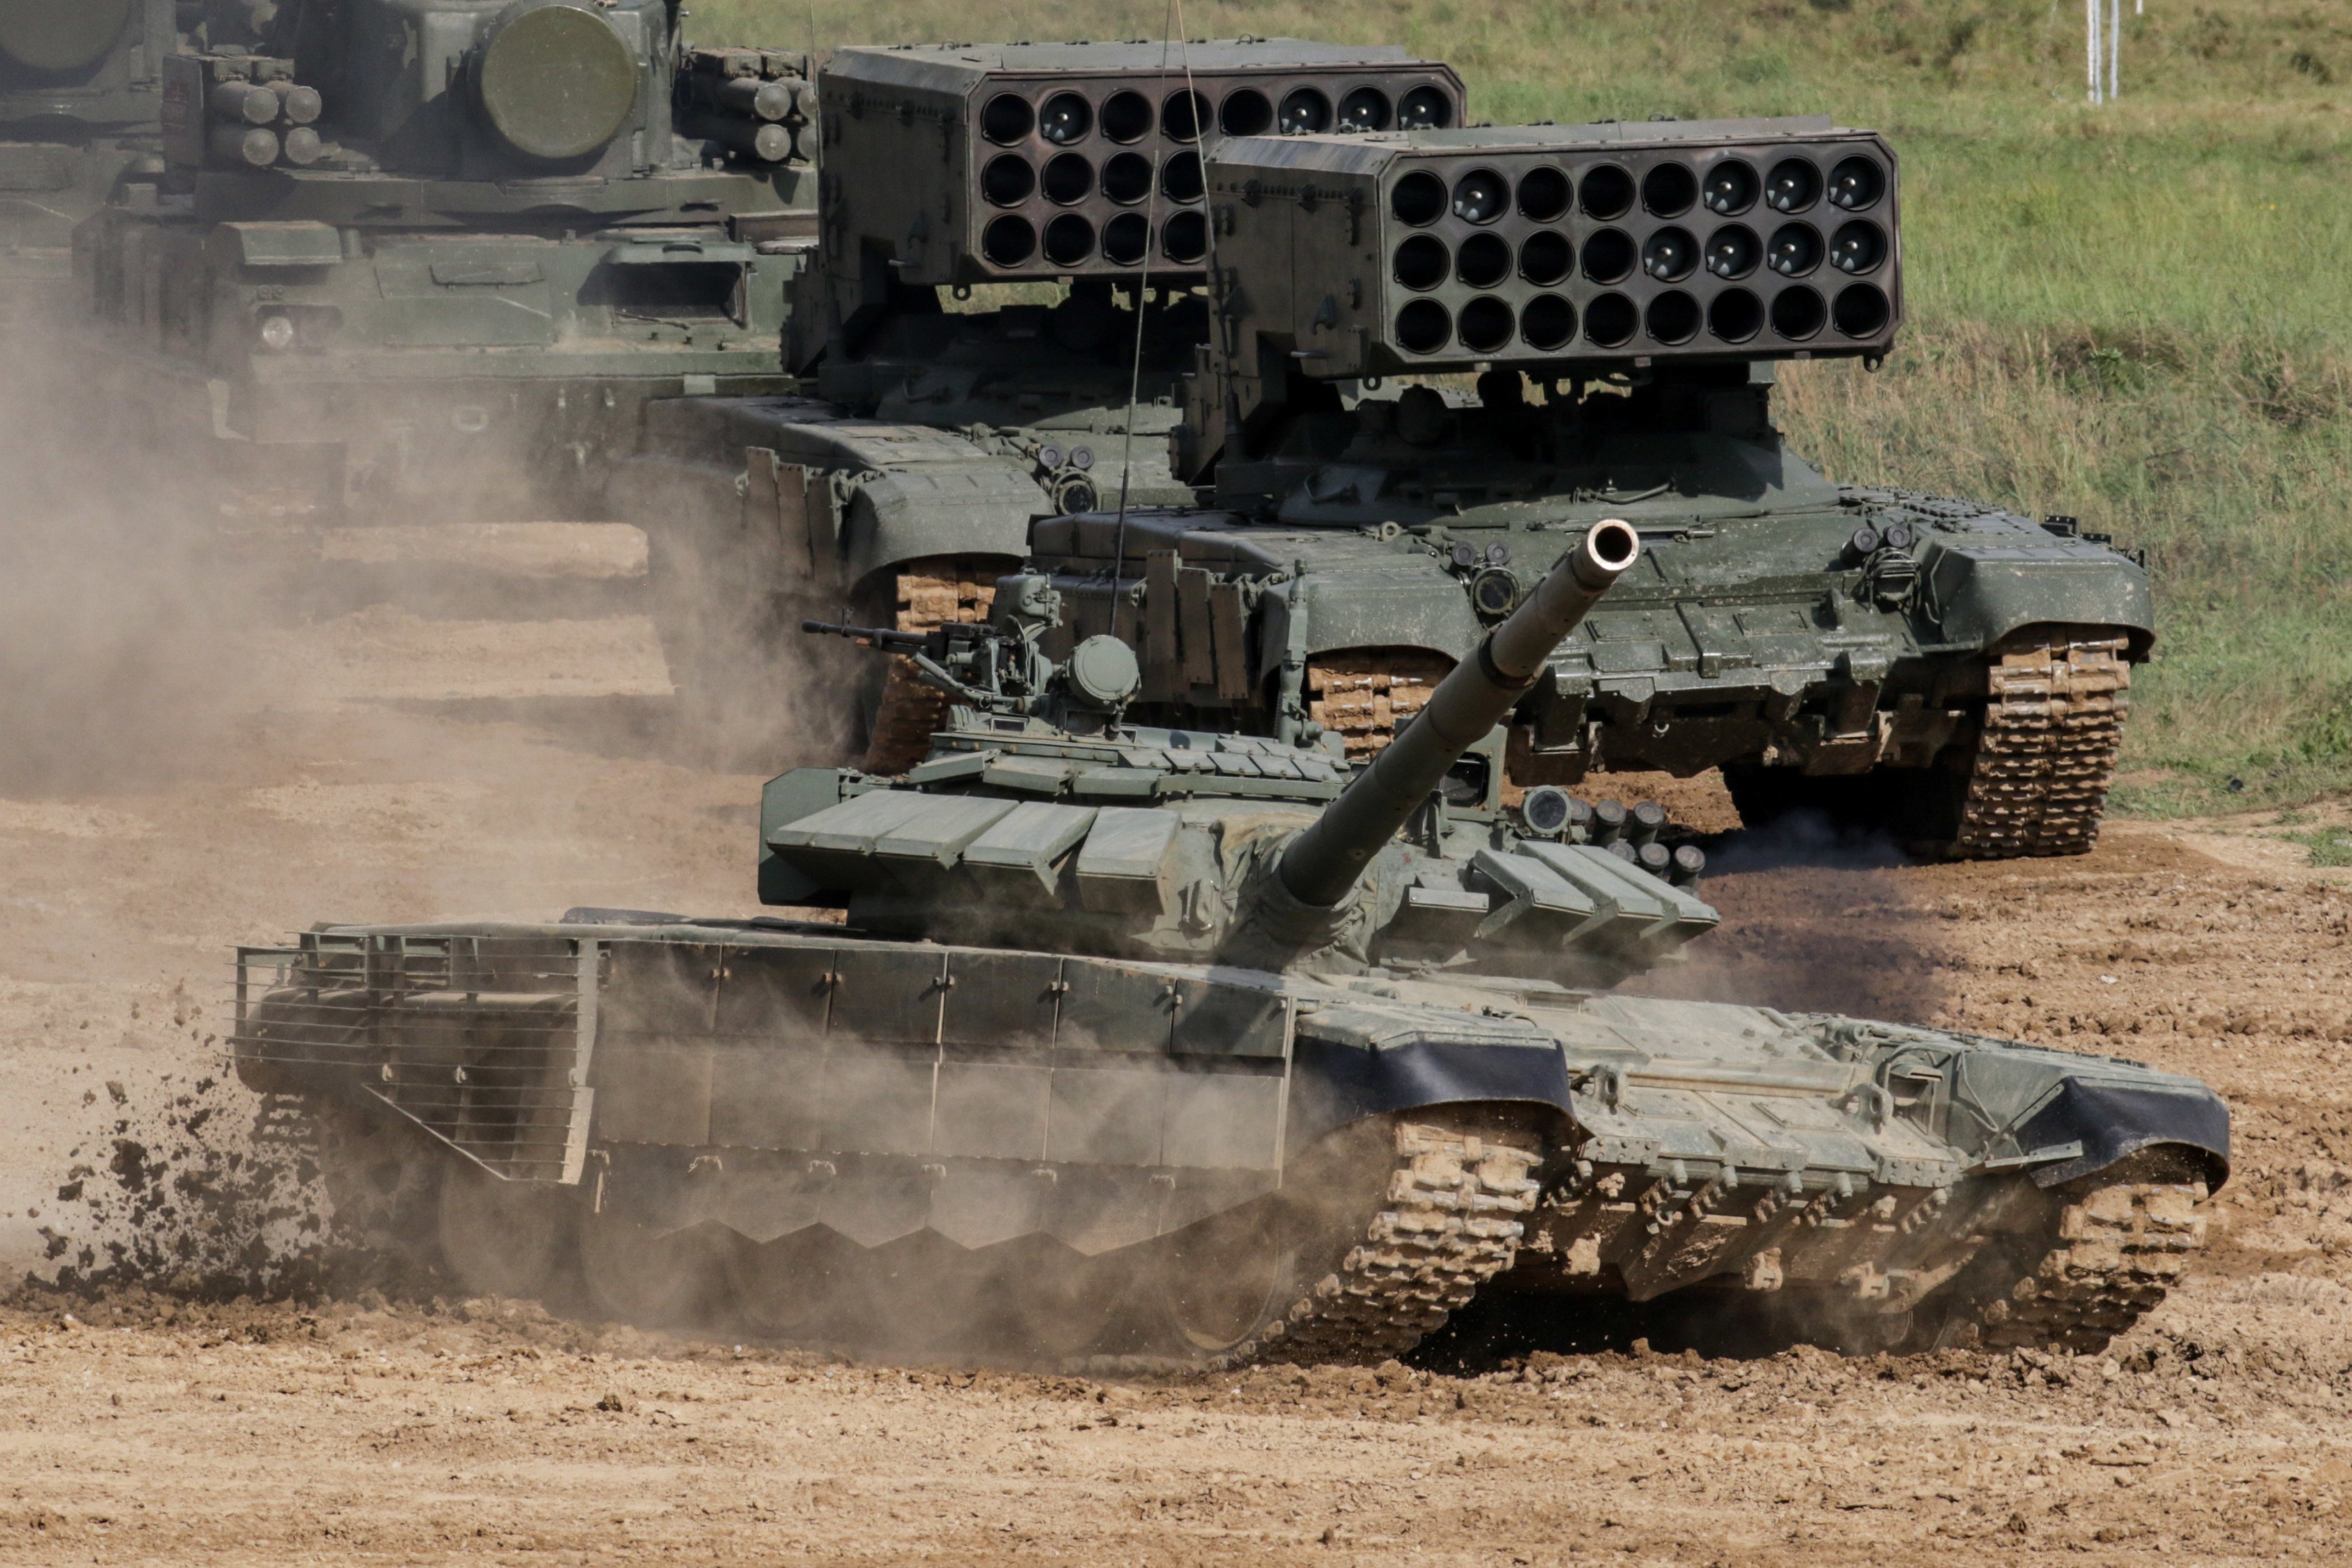 Russian Army T-72 B3M tanks are seen during the annual Army